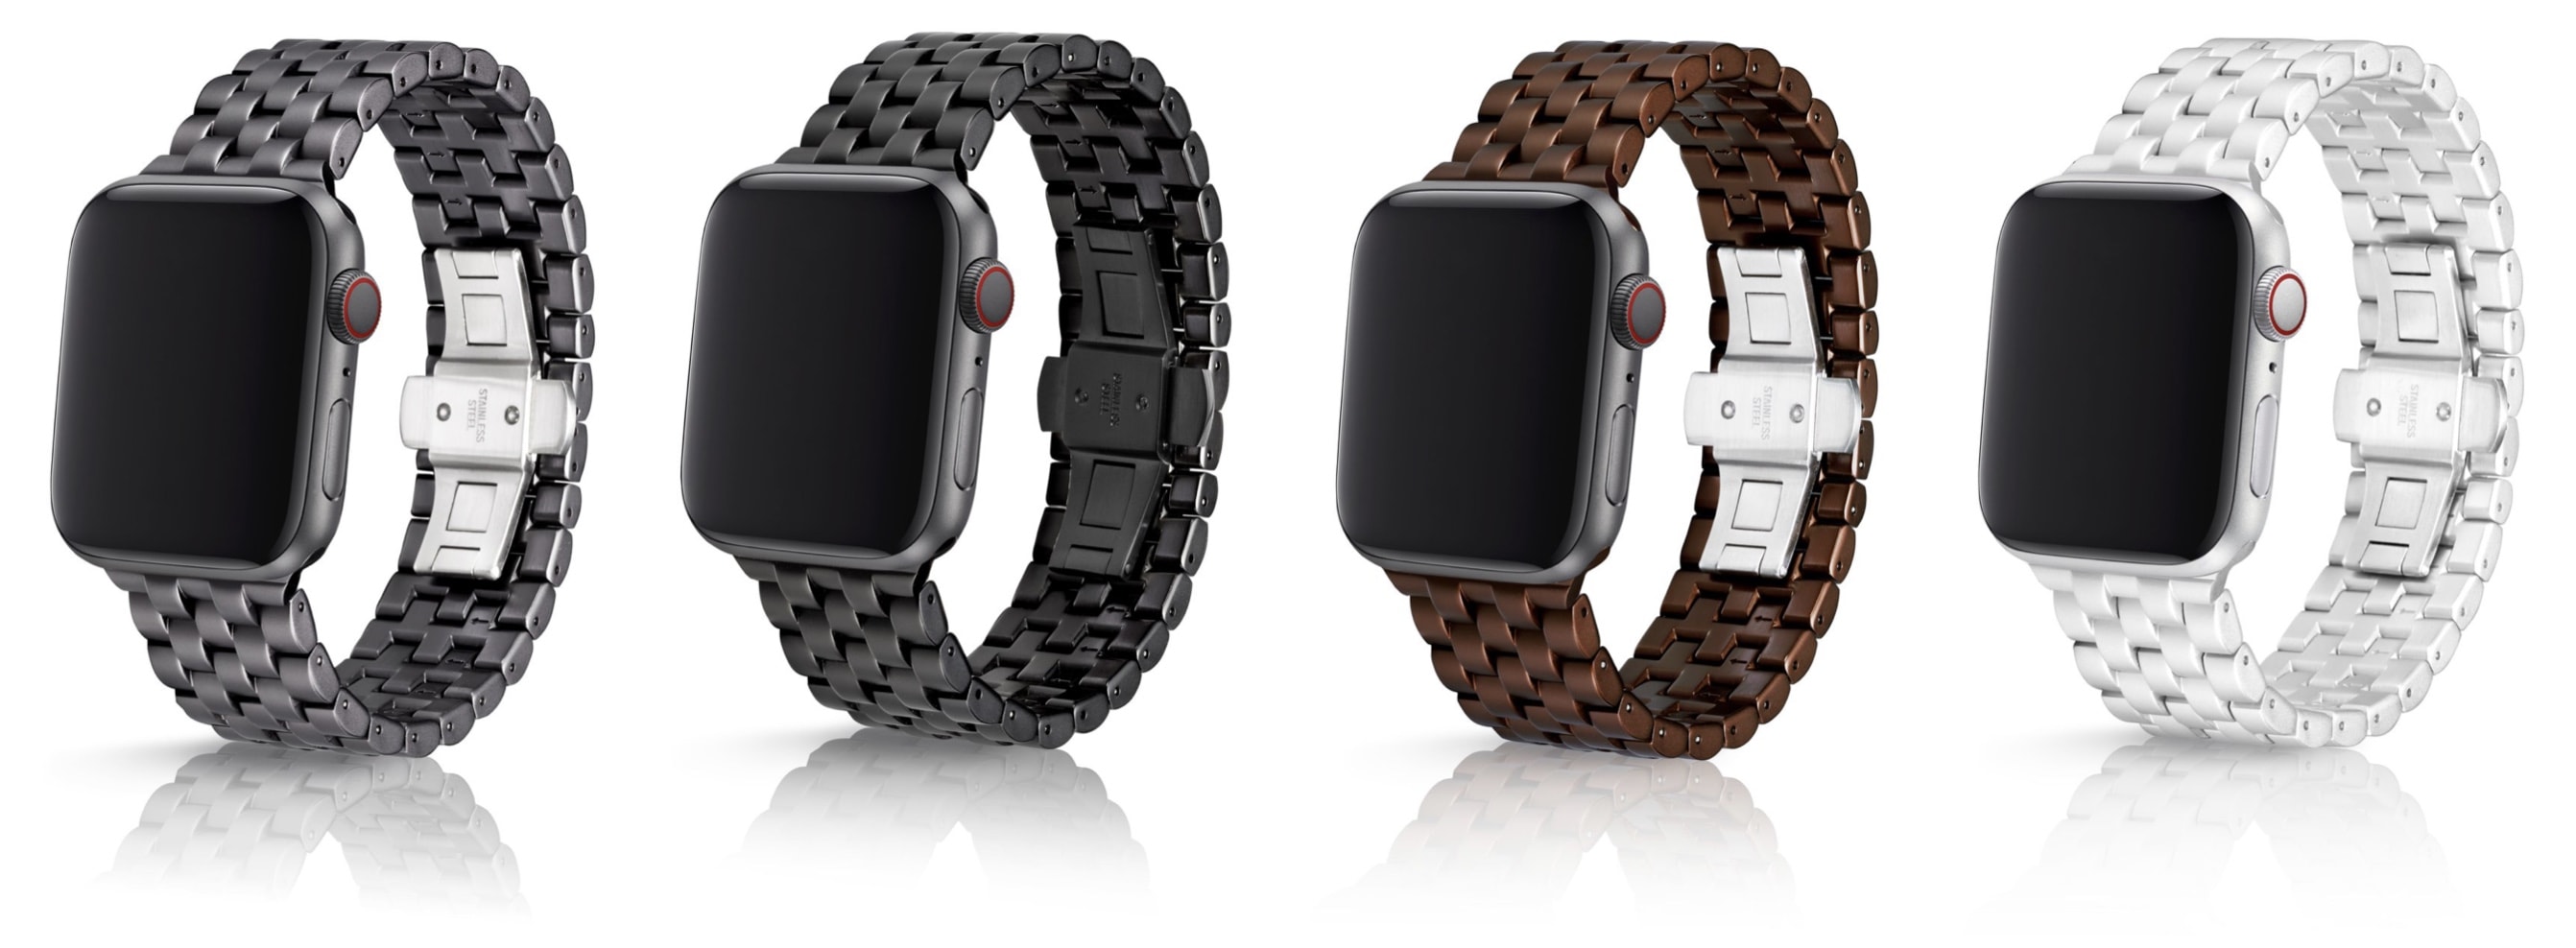 Juuk Qrono band for Apple Watch comes in four striking colors.